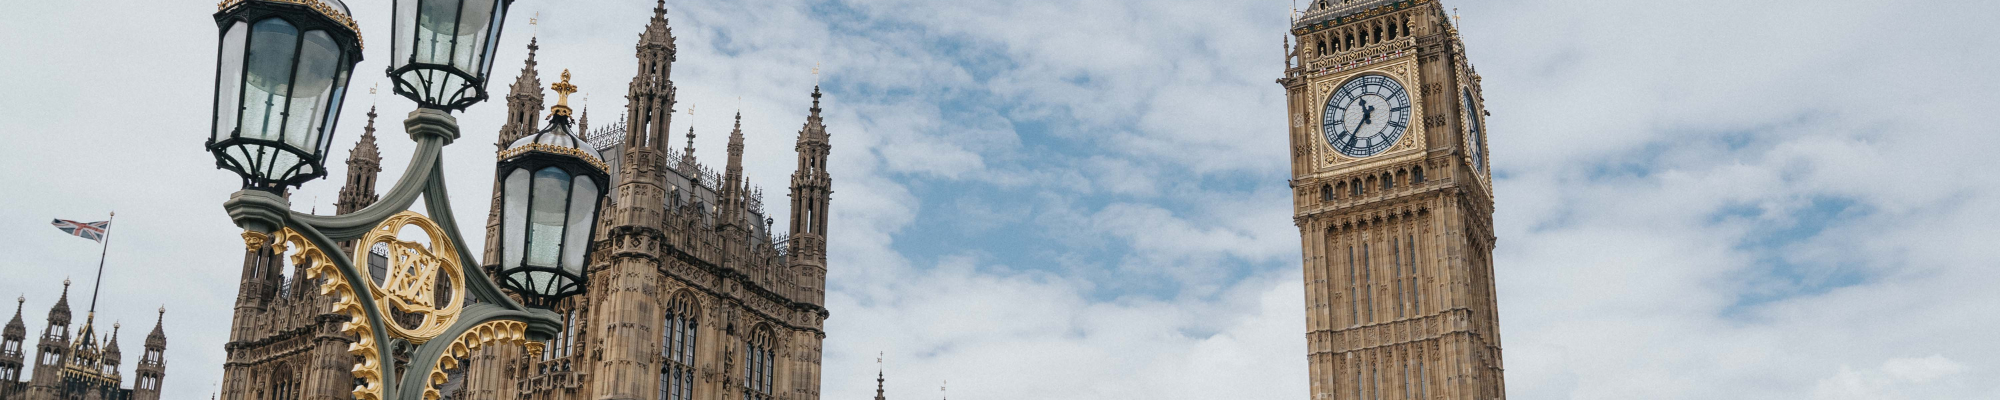 a photo of big ben in london